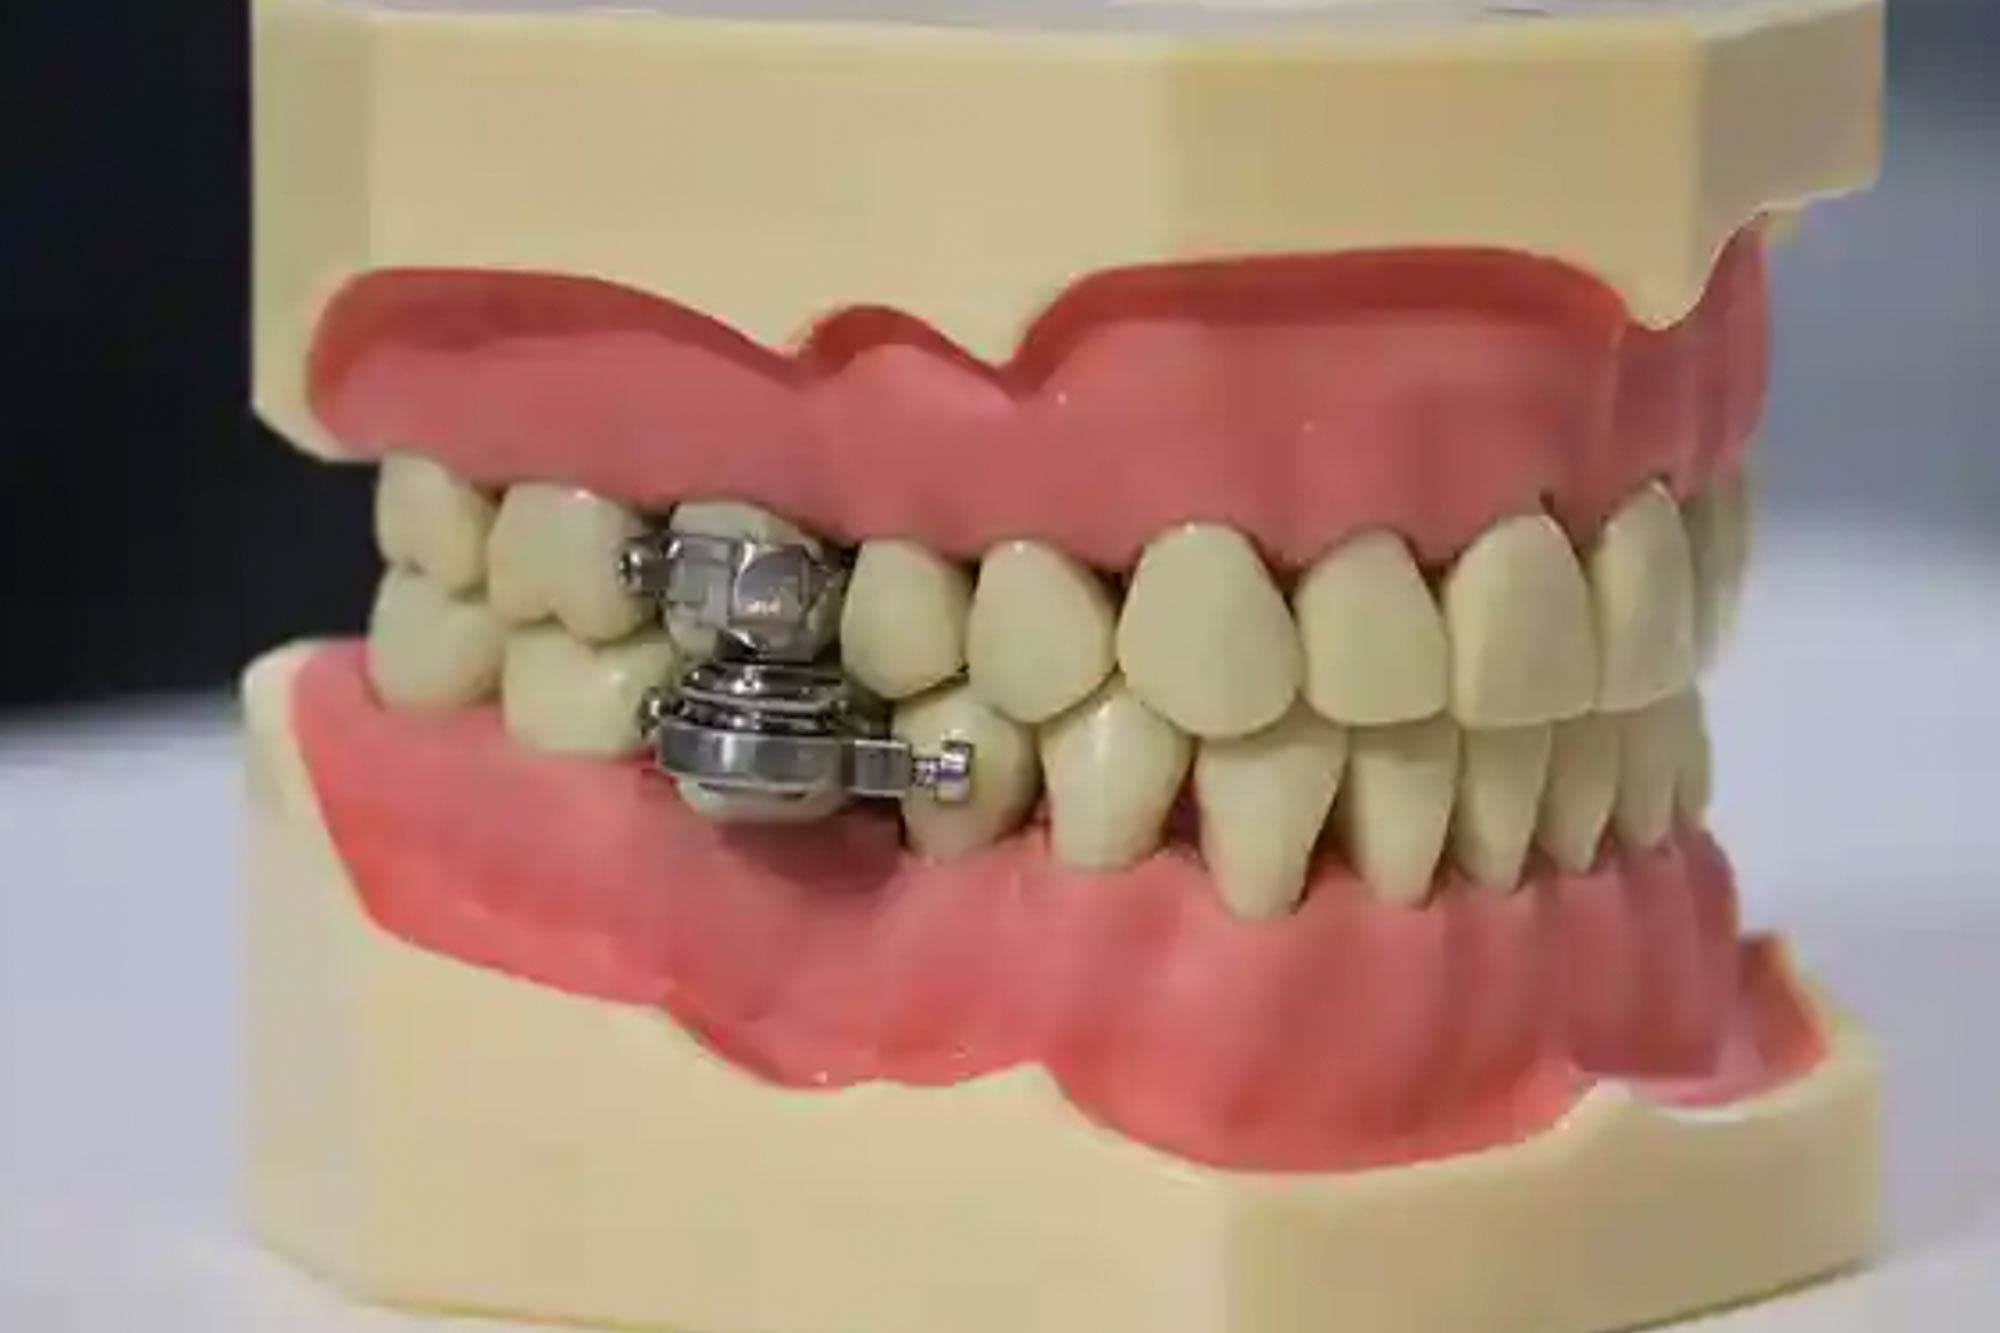 Weight loss dental device that prevents mouth opening designed to tackle obesity